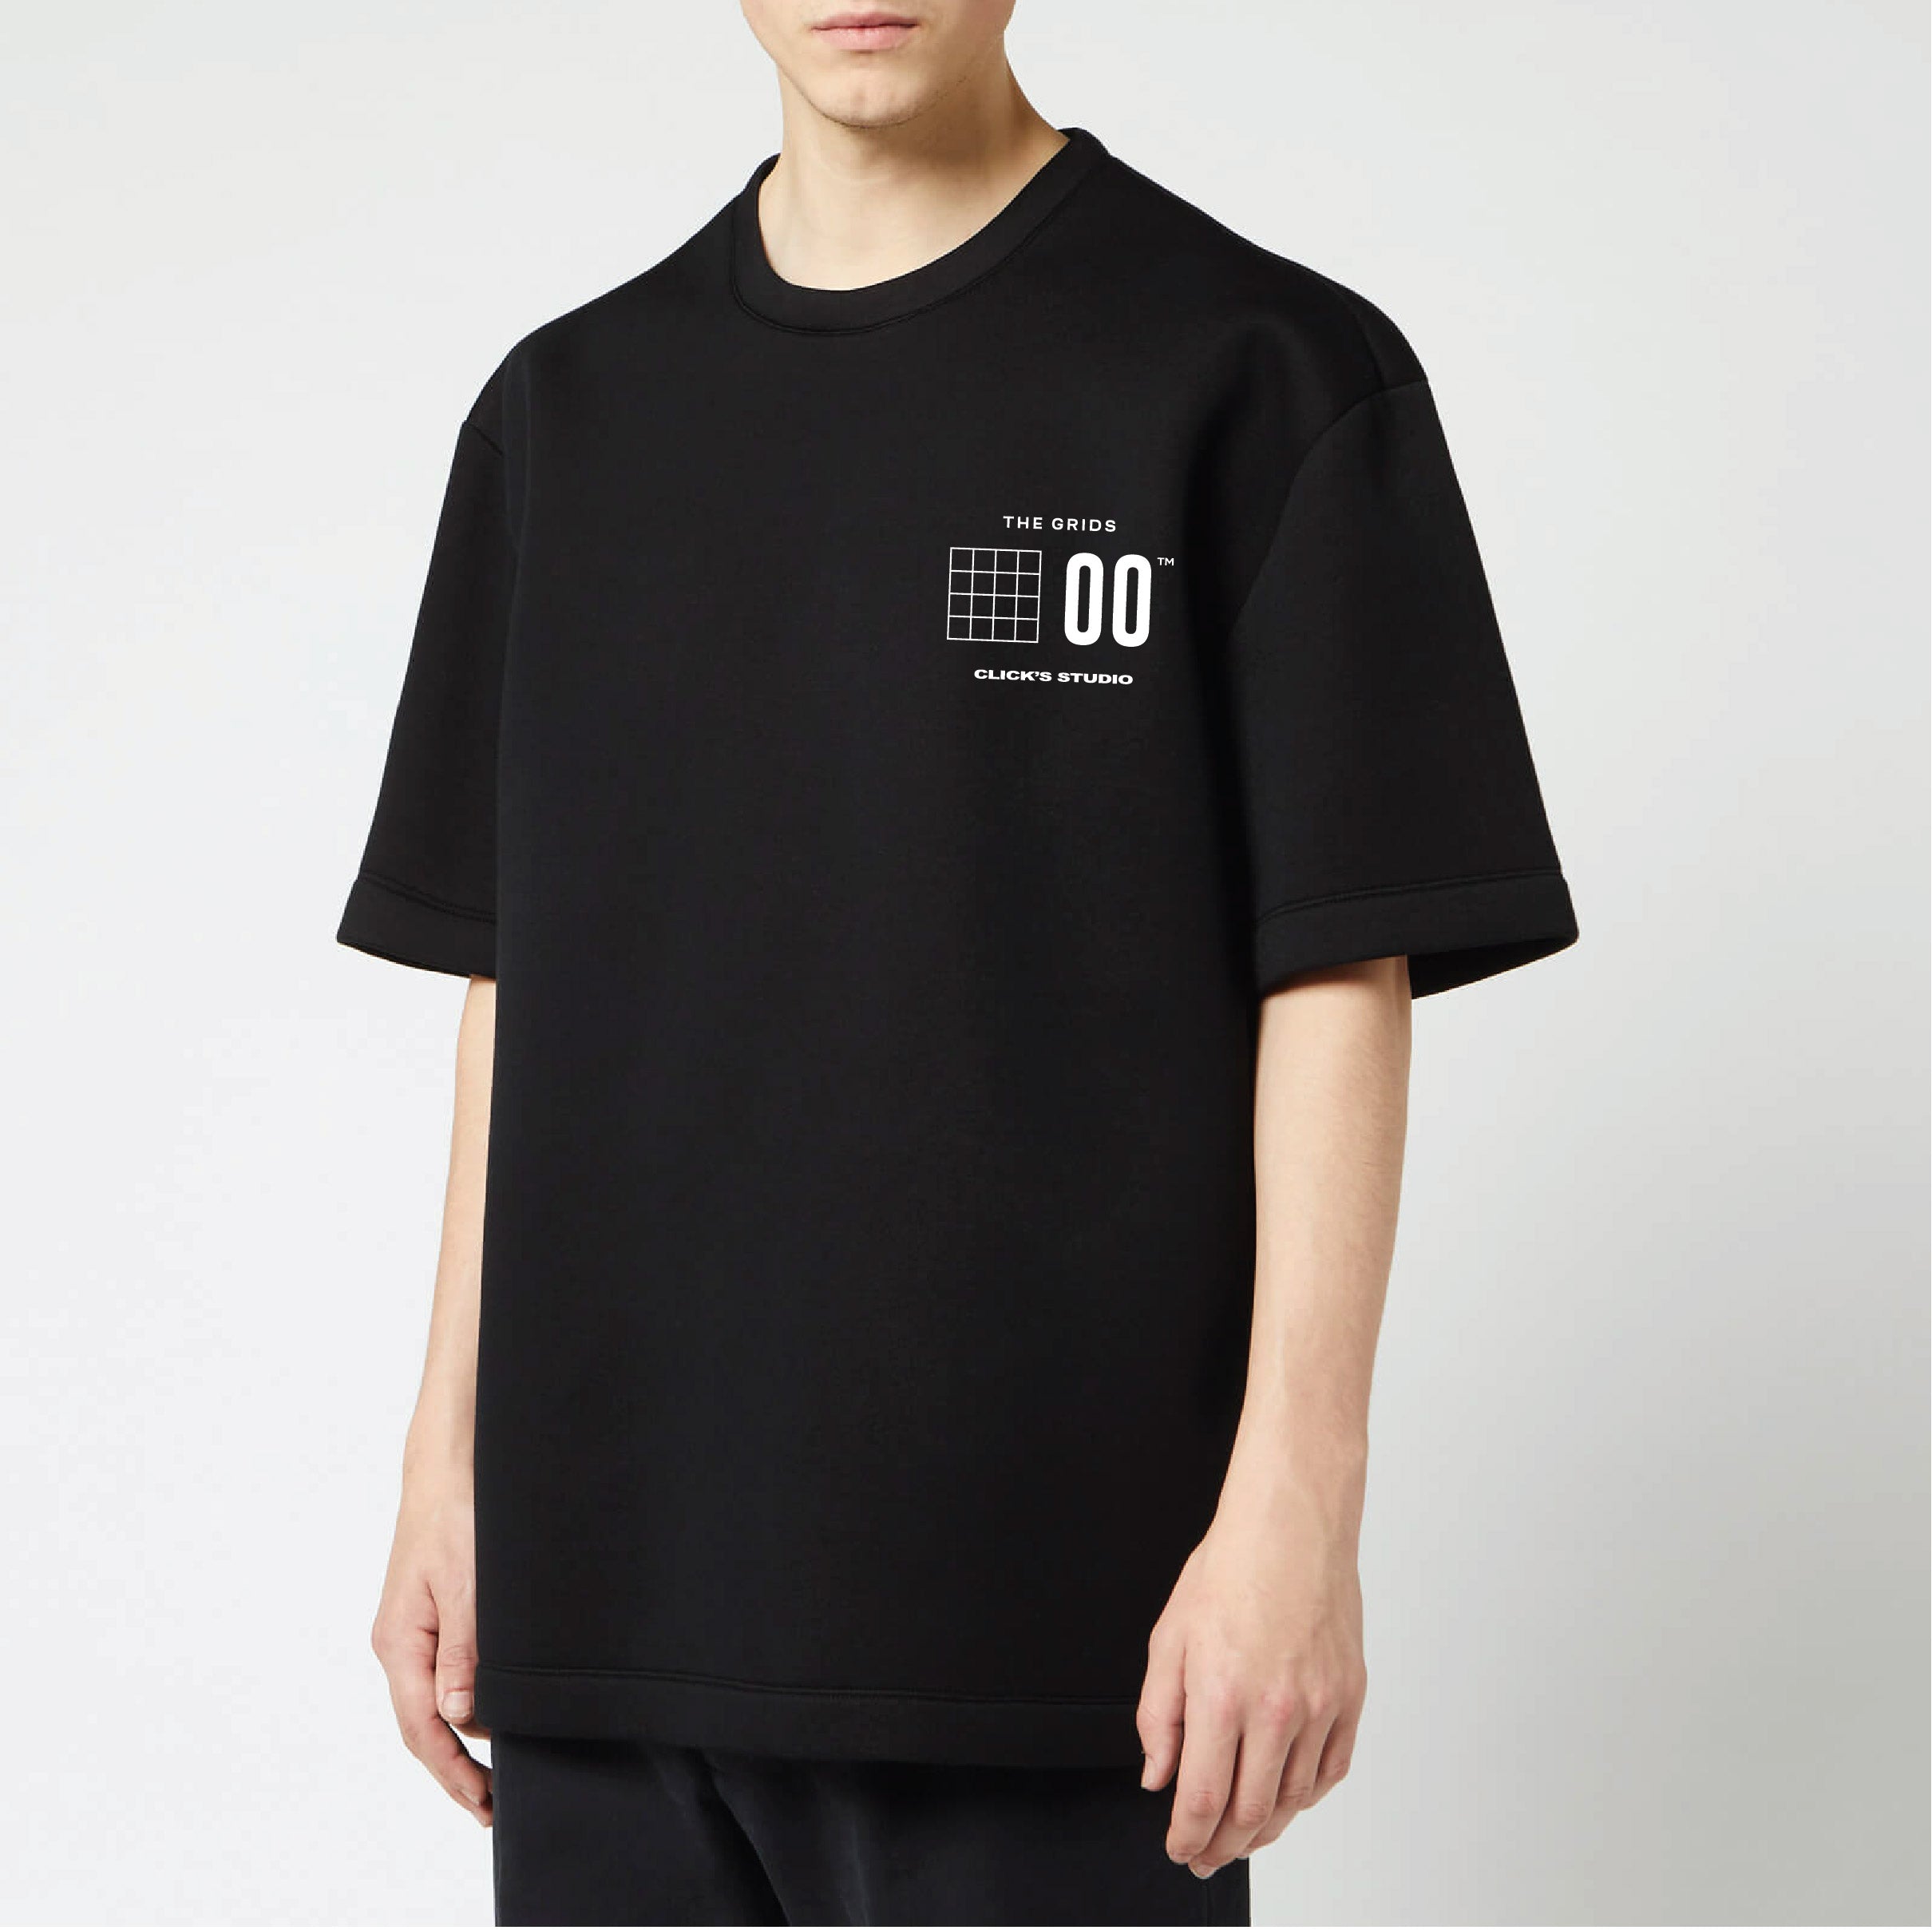 The Grids Tee by Click's